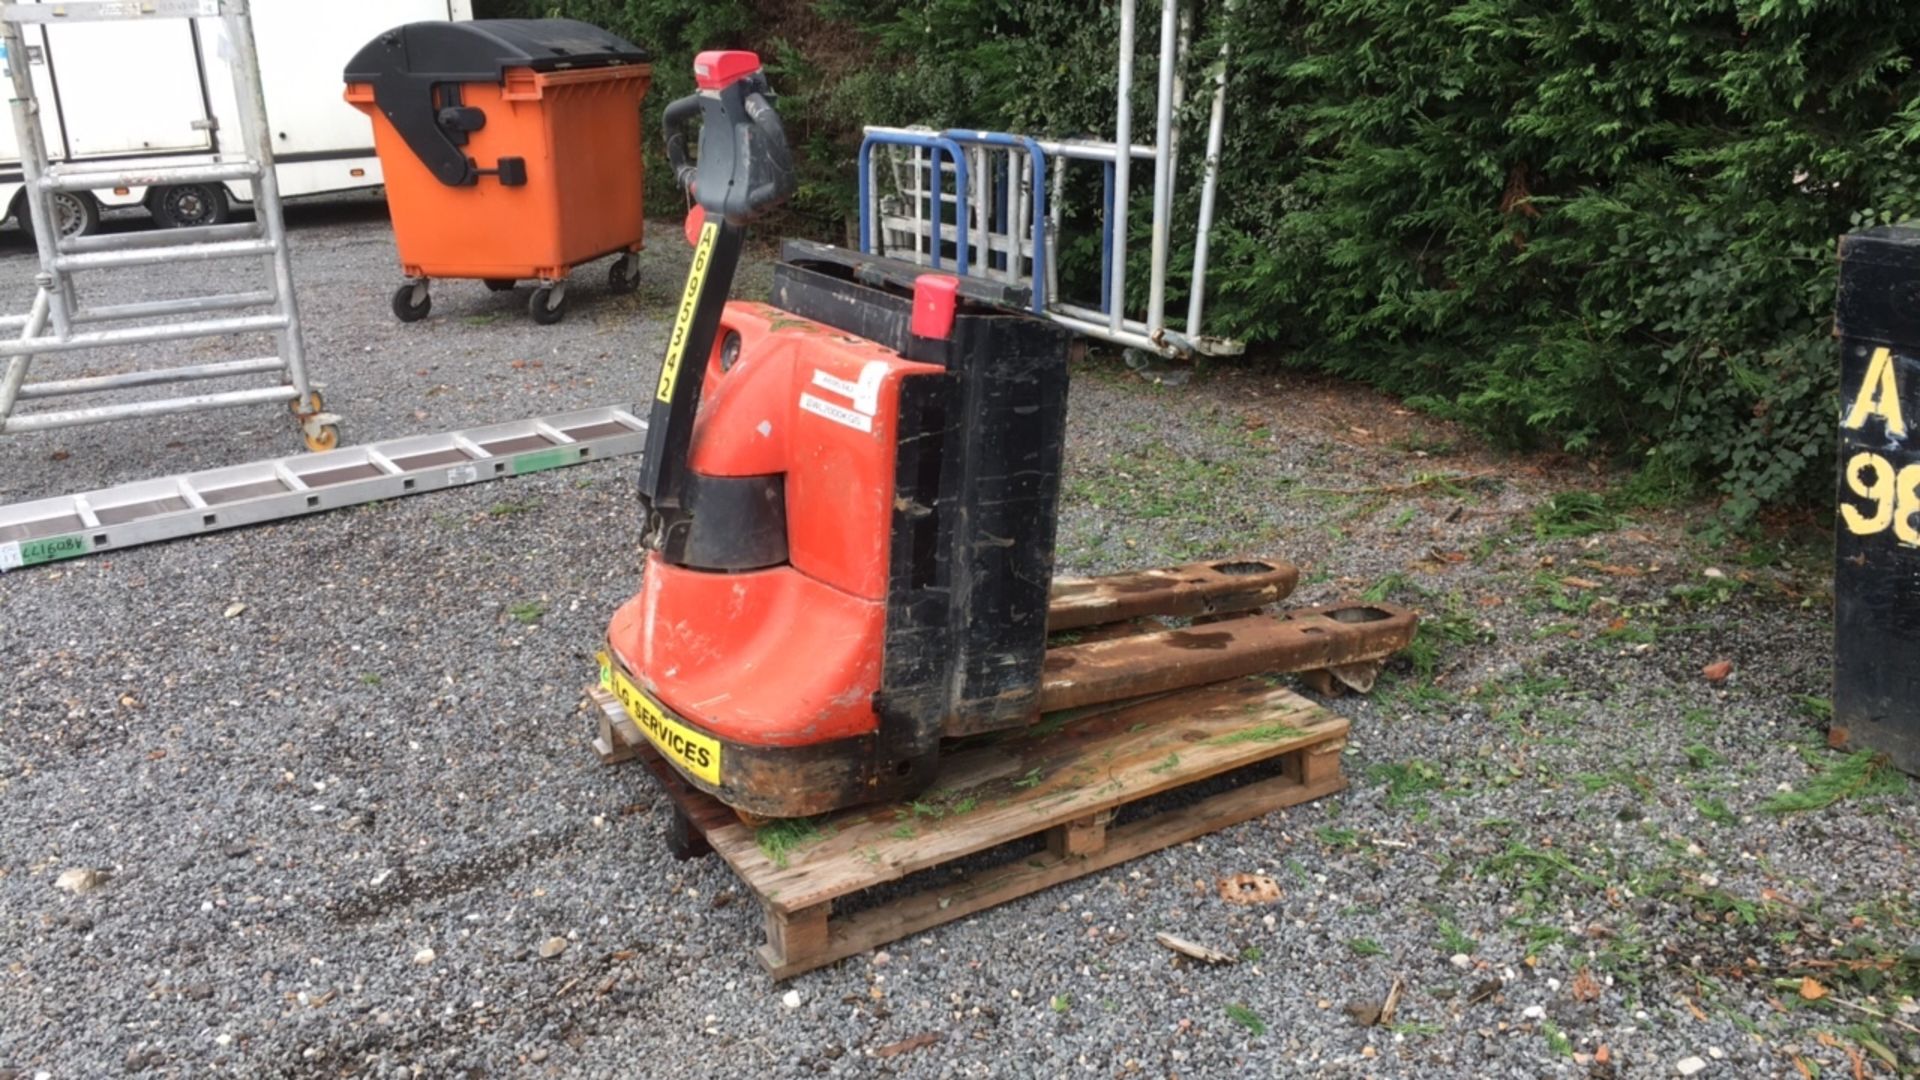 Electric Pallet Truck 2000kg (A695342) - Image 3 of 5